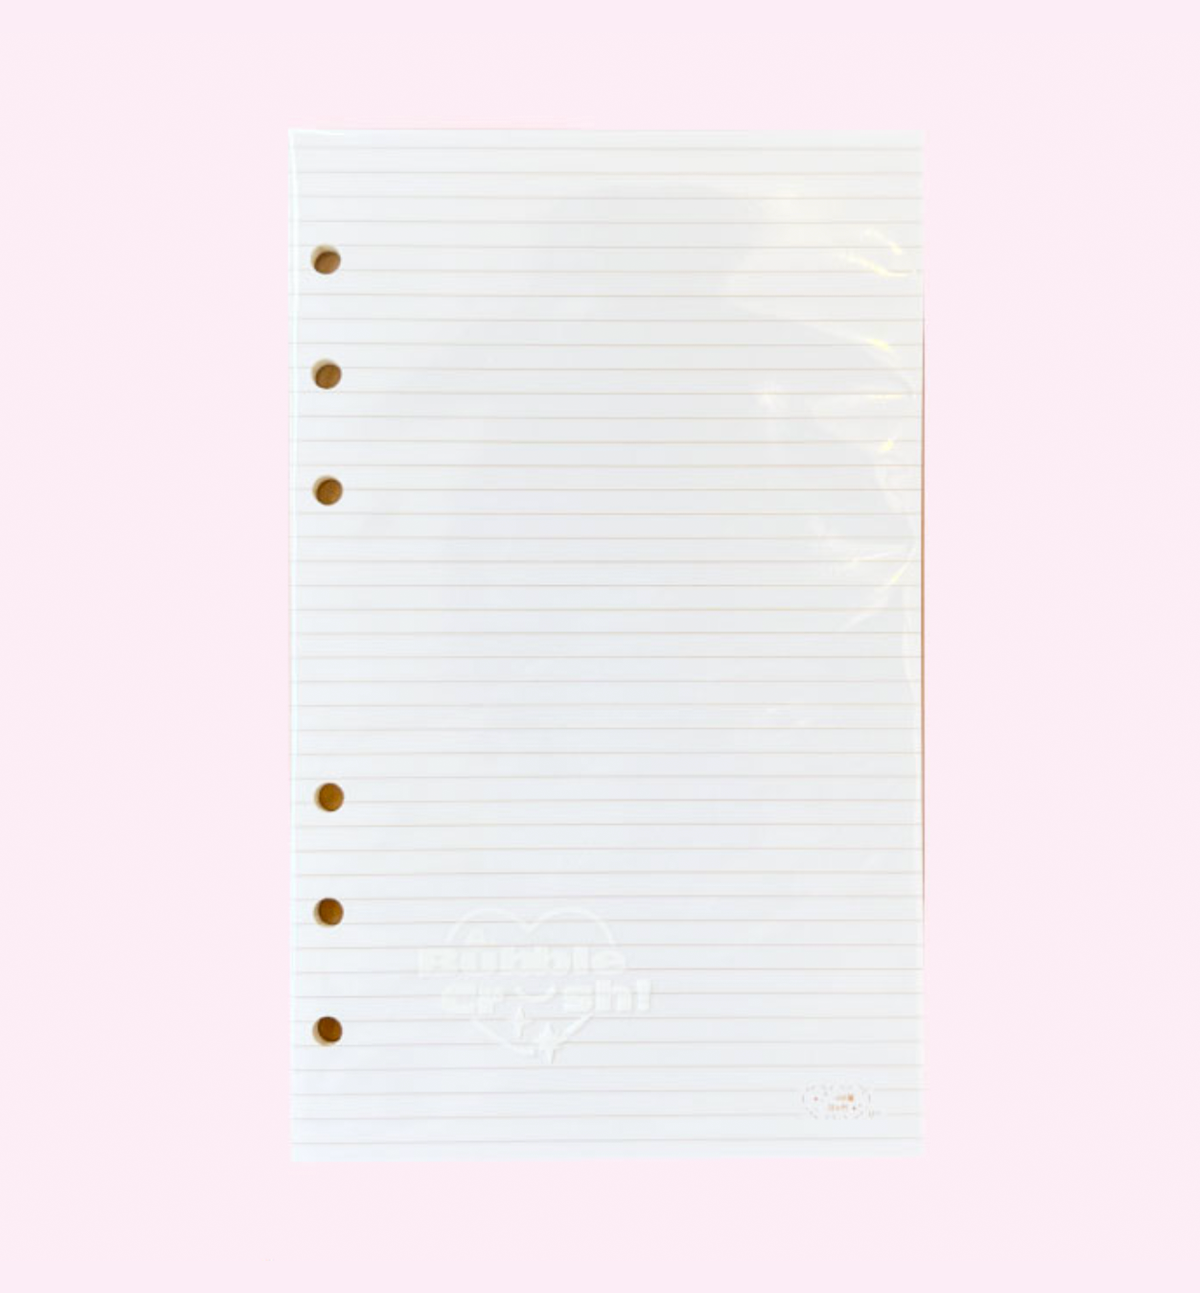 A6 Brown Free Note Paper Refill